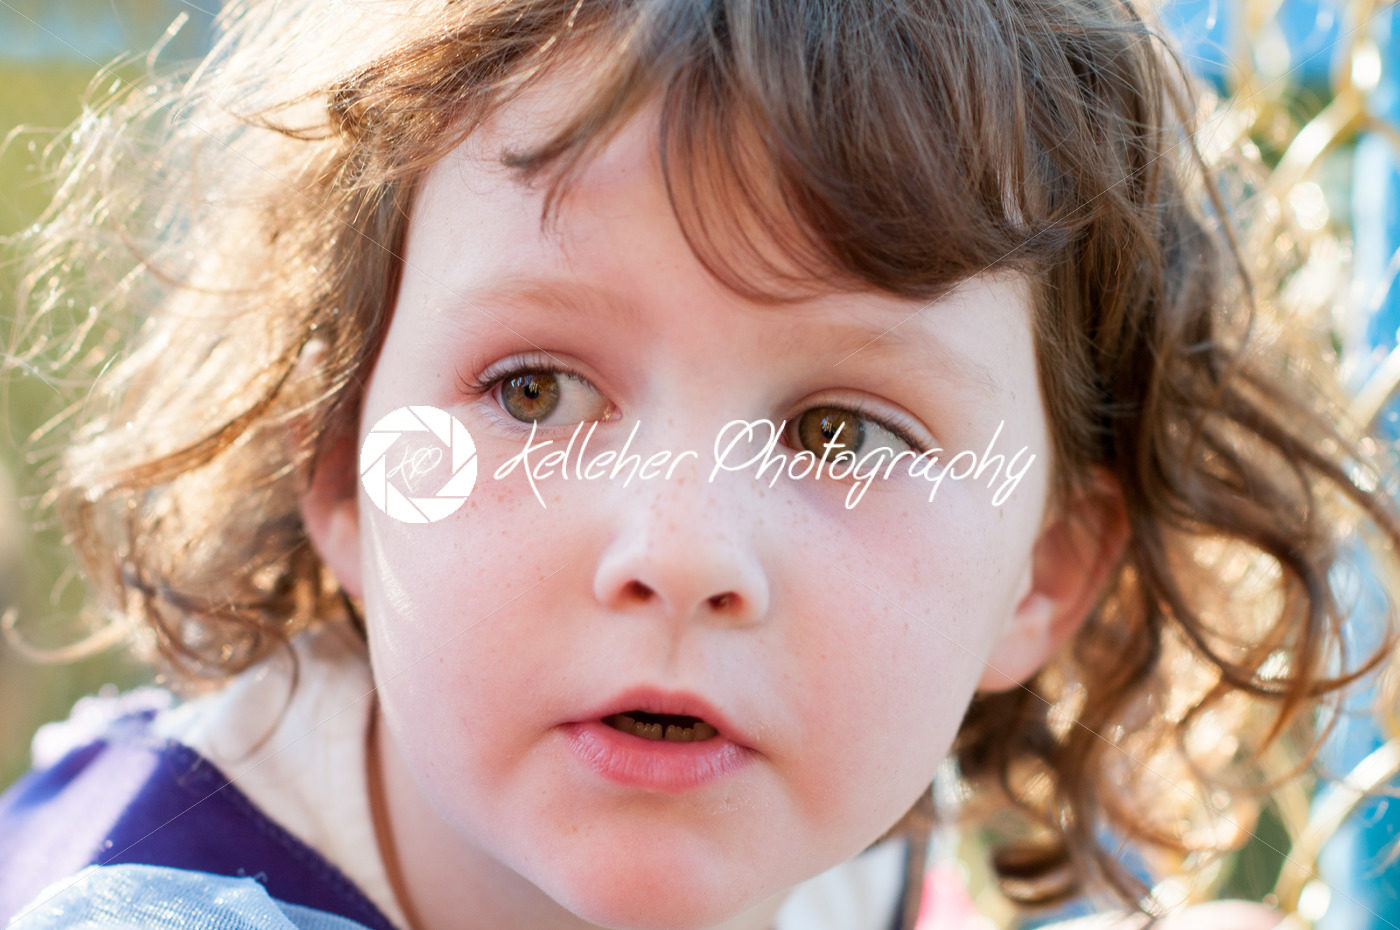 Close up Portrait of young girl outside - Kelleher Photography Store